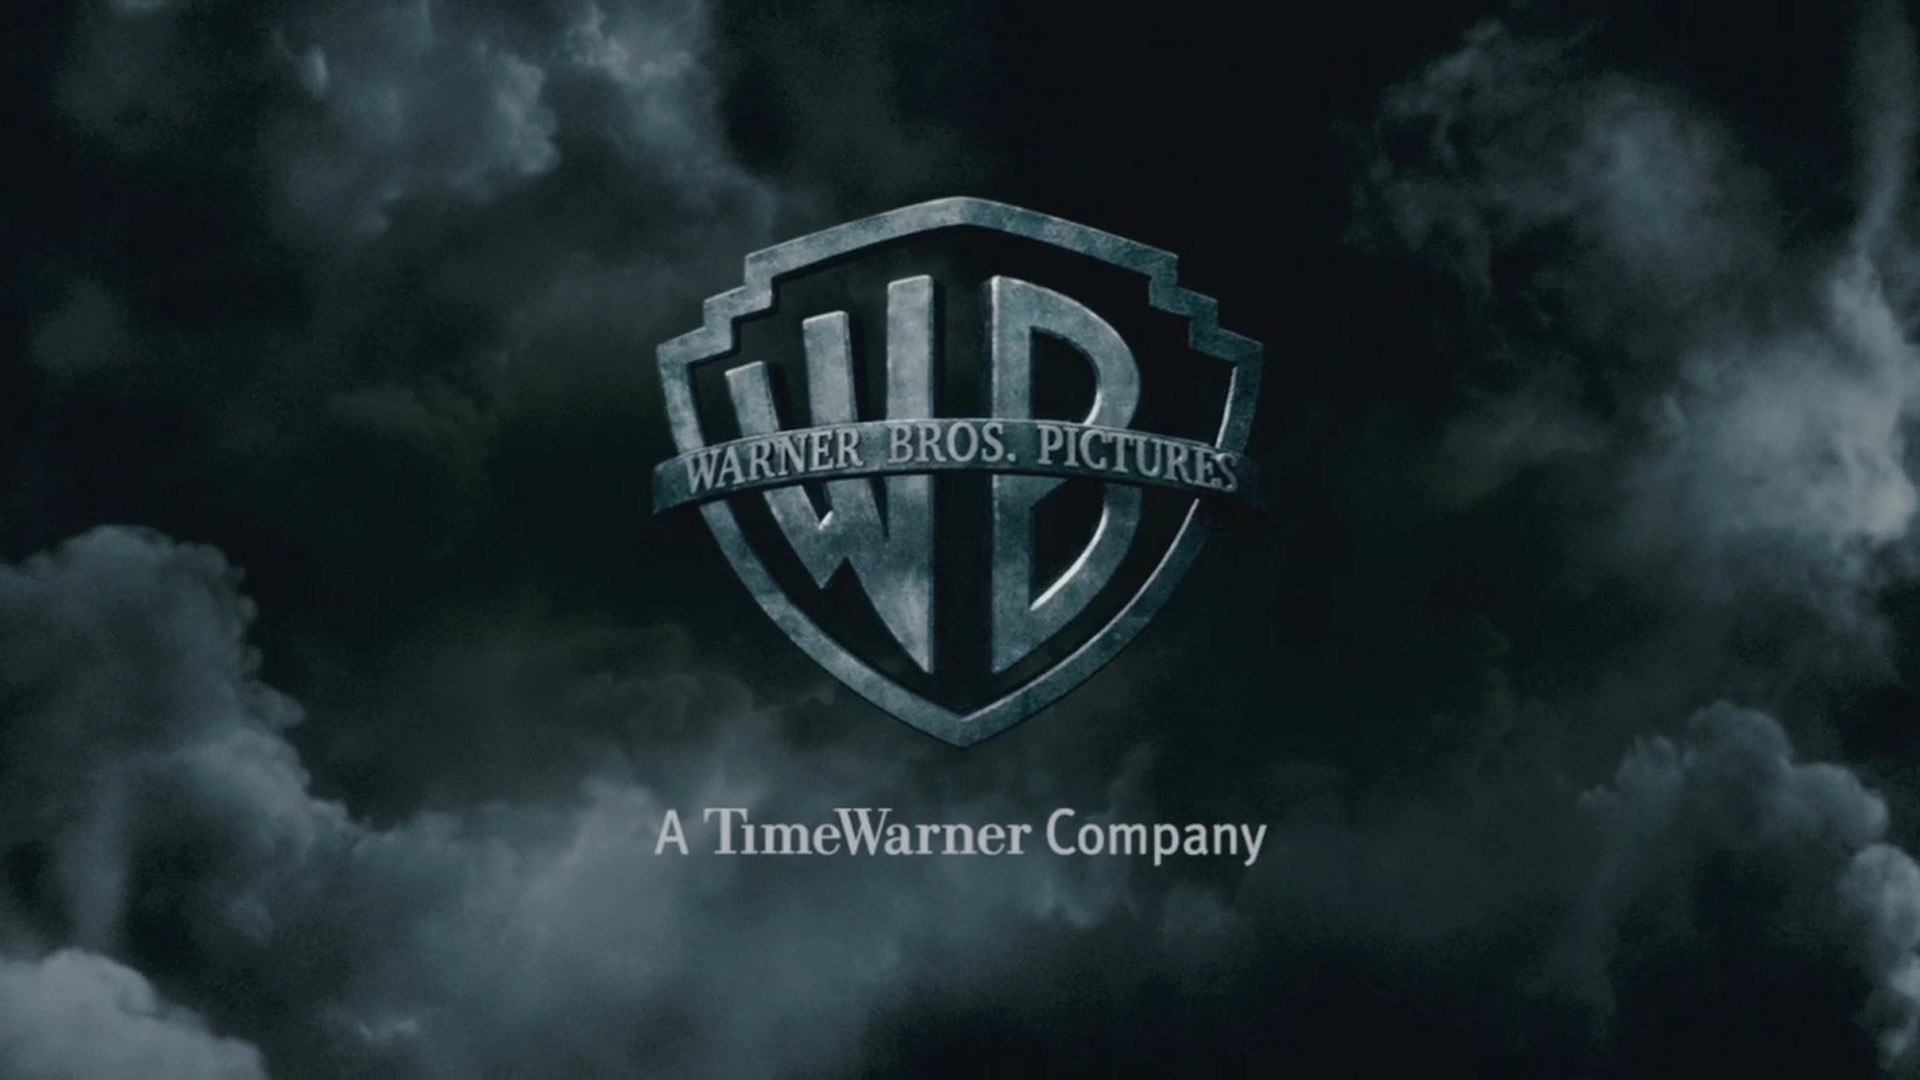 1920x1080 ... Free Harry Potter Movie Logos Wallpapers Just For You! We Try to  Present Harry Potter